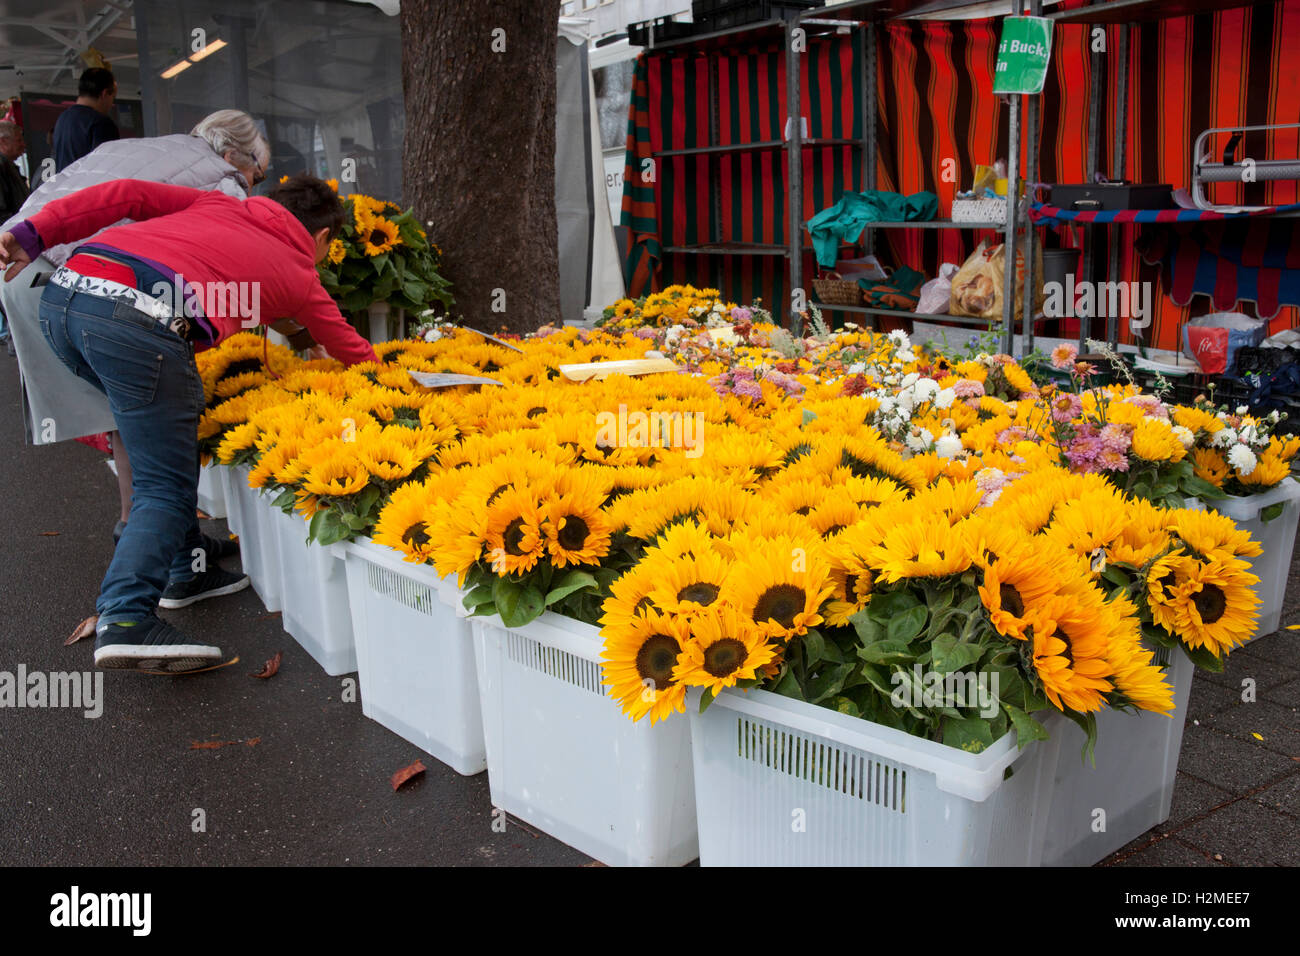 sunflowers for sale in a market Stock Photo